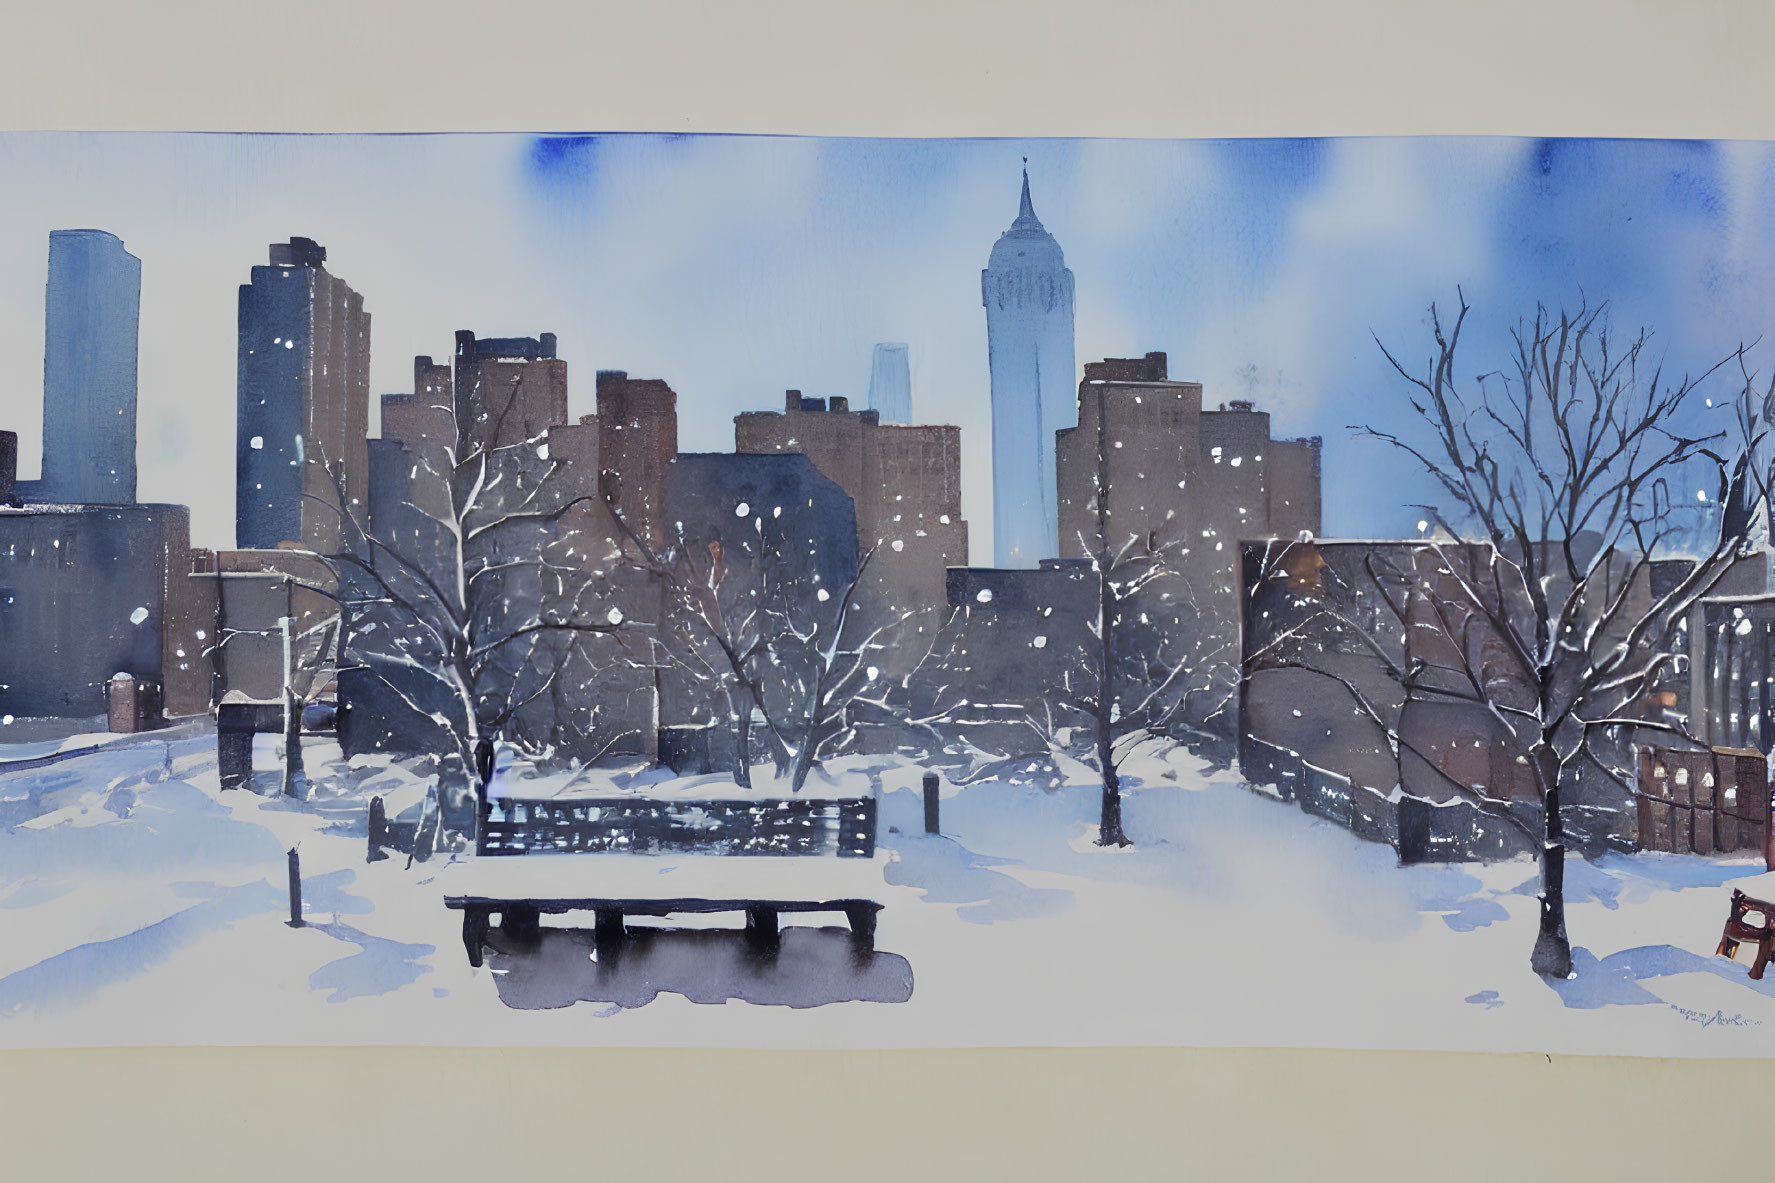 Snowy urban park watercolor painting with bare trees and high-rise buildings.